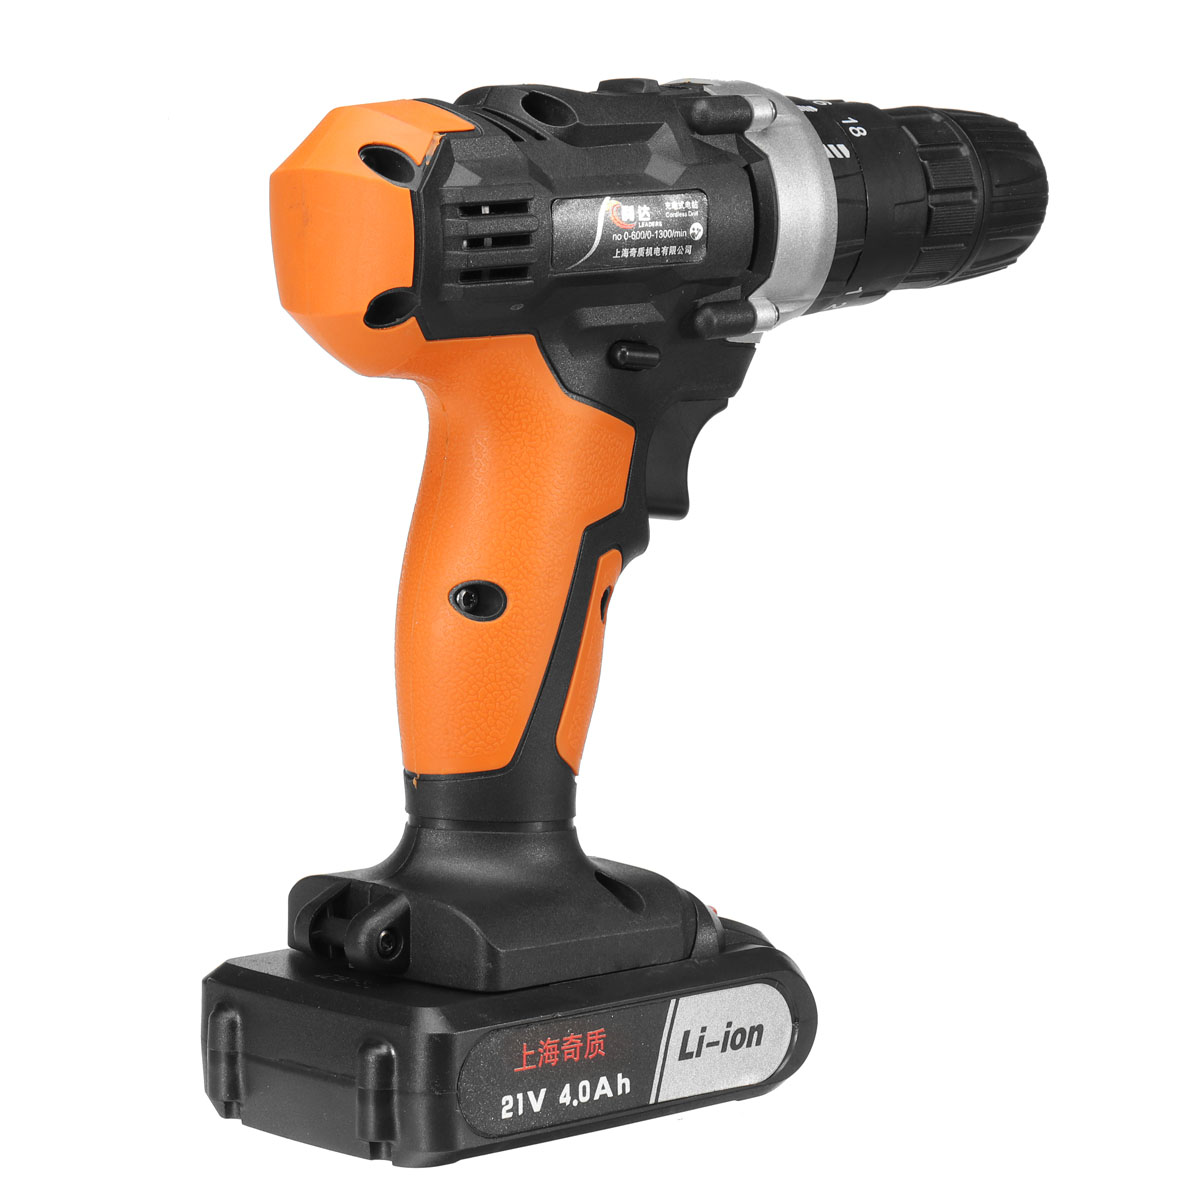 21V-4000mAh-Li-ion-Cordless-Electric-Impact-Drill-183-Clutches-2-Speed-Power-Drills-With-2-Batteries-1412172-8